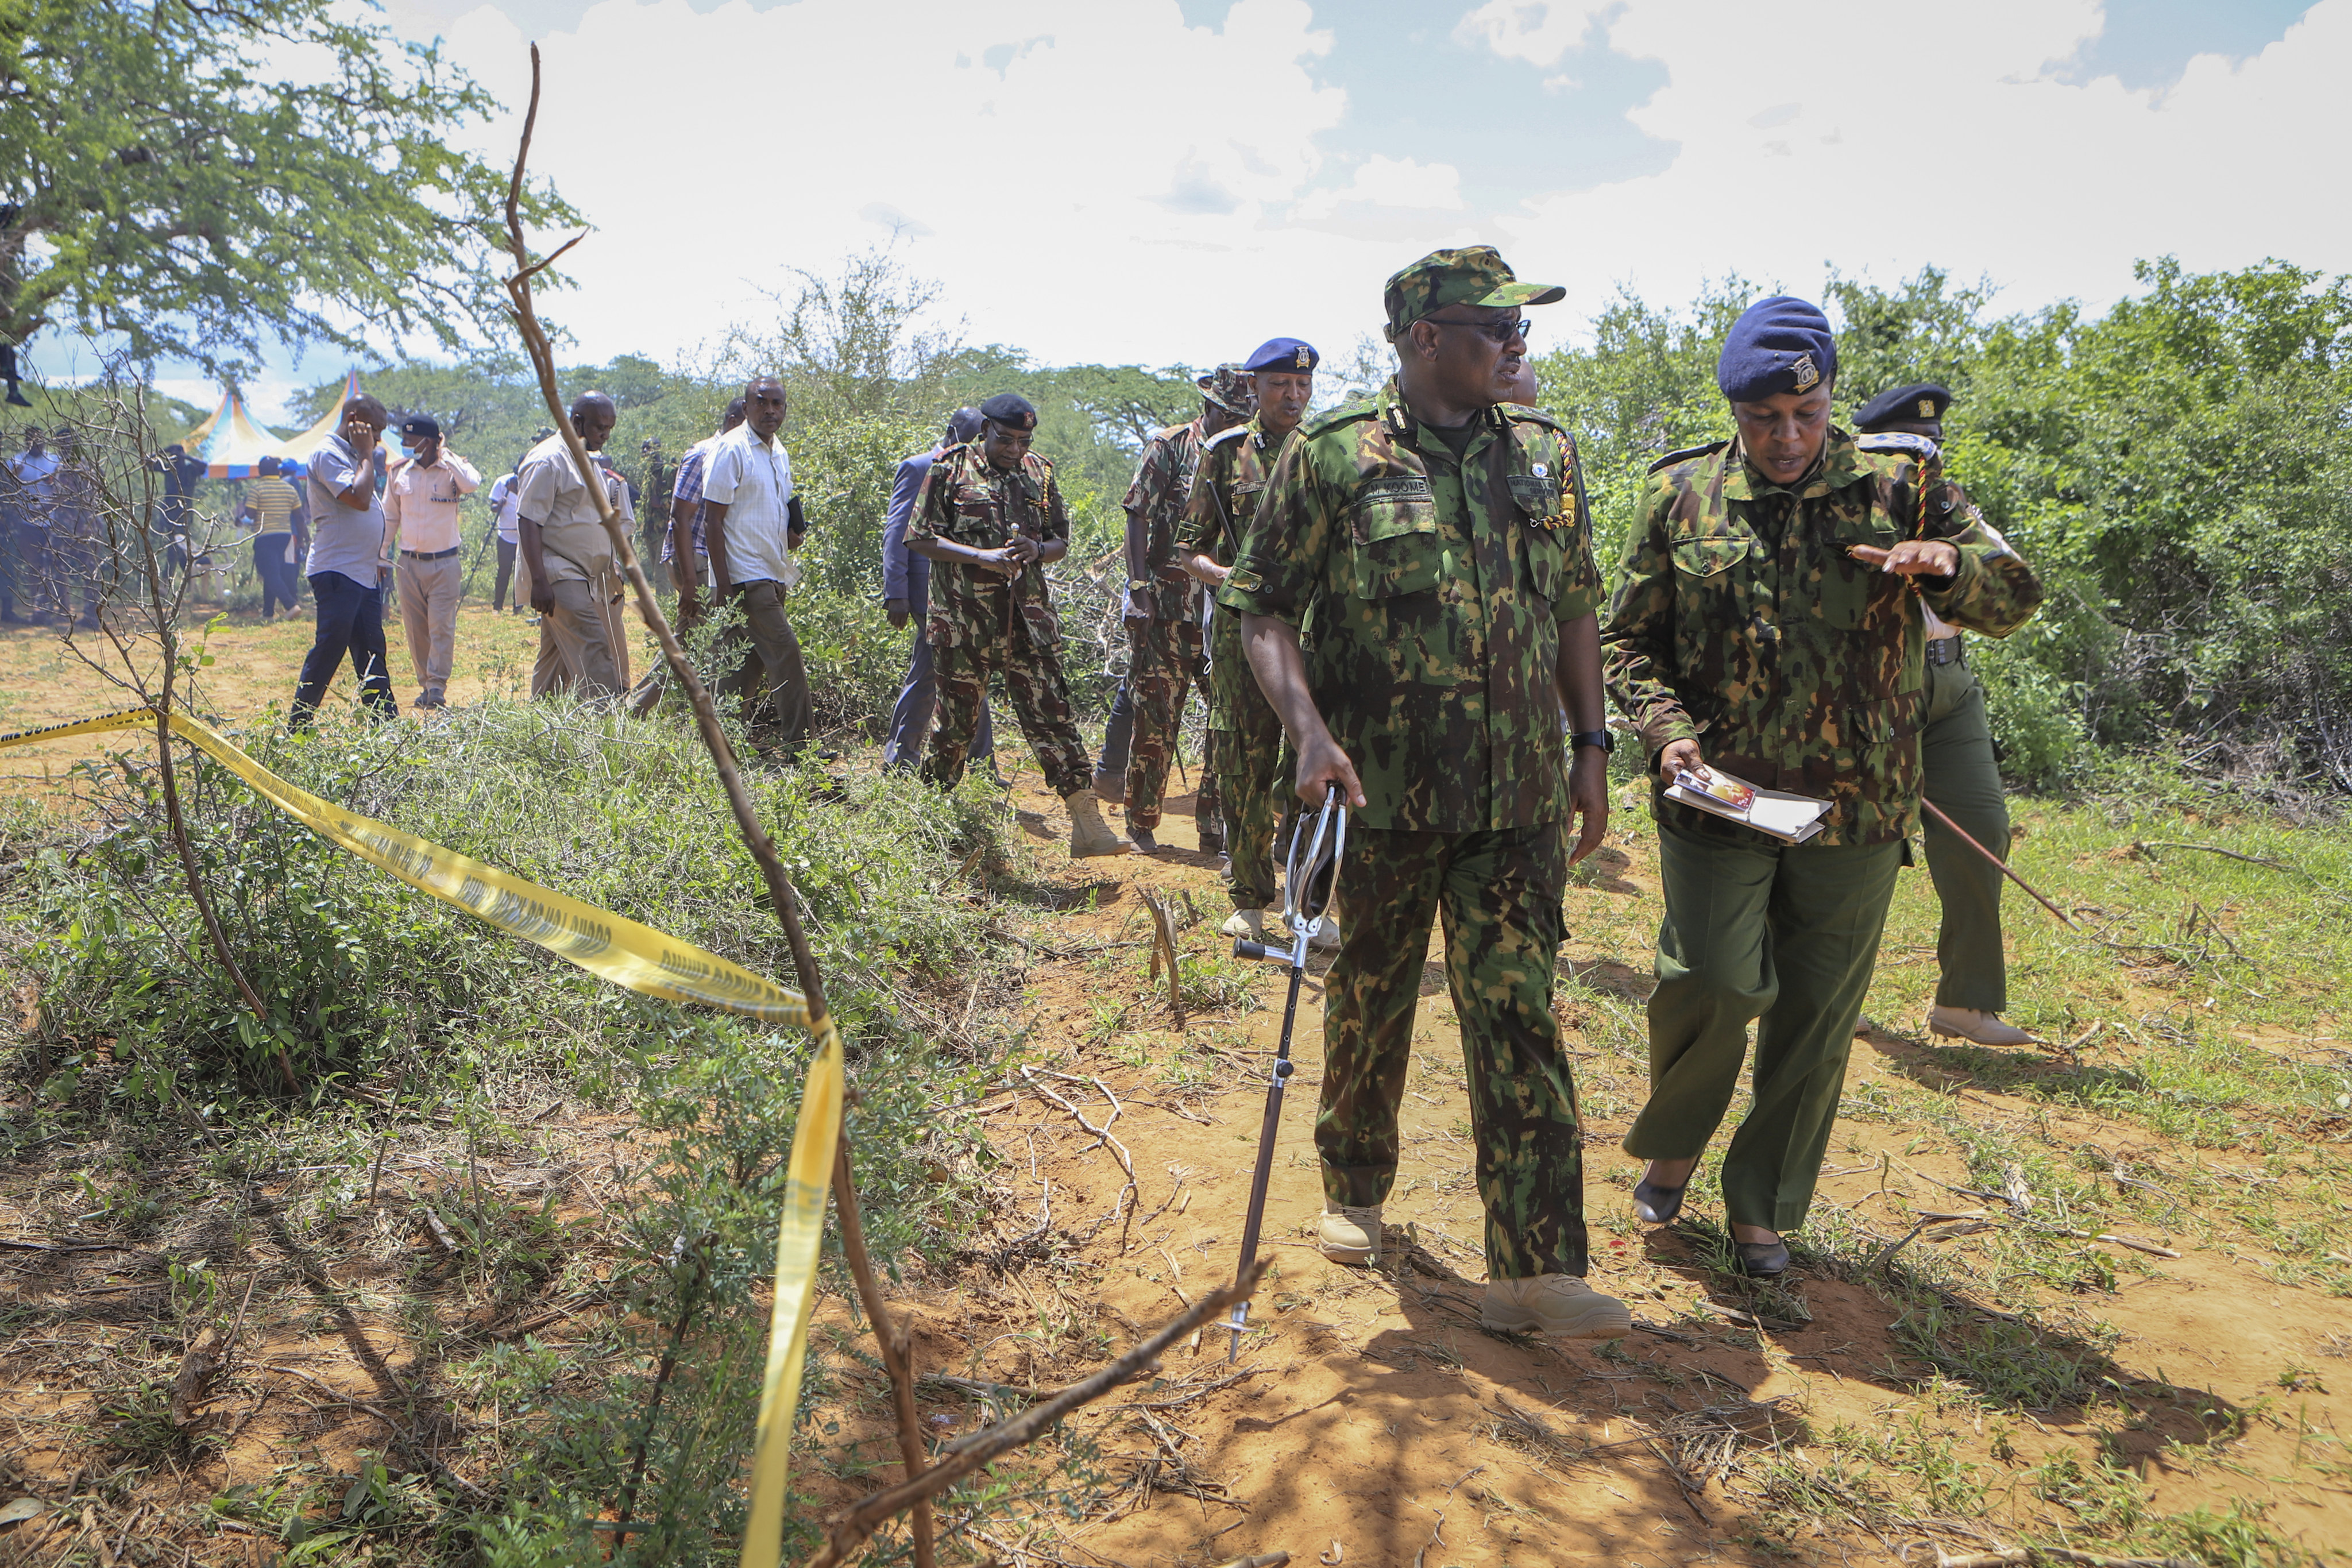 Kenya’s Inspector General of Police, Japhet Koome, second right, tours the scene where dozens of bodies have been found in shallow graves in the village of Shakahola, near the coastal city of Malindi, in southern Kenya. Photo: AP